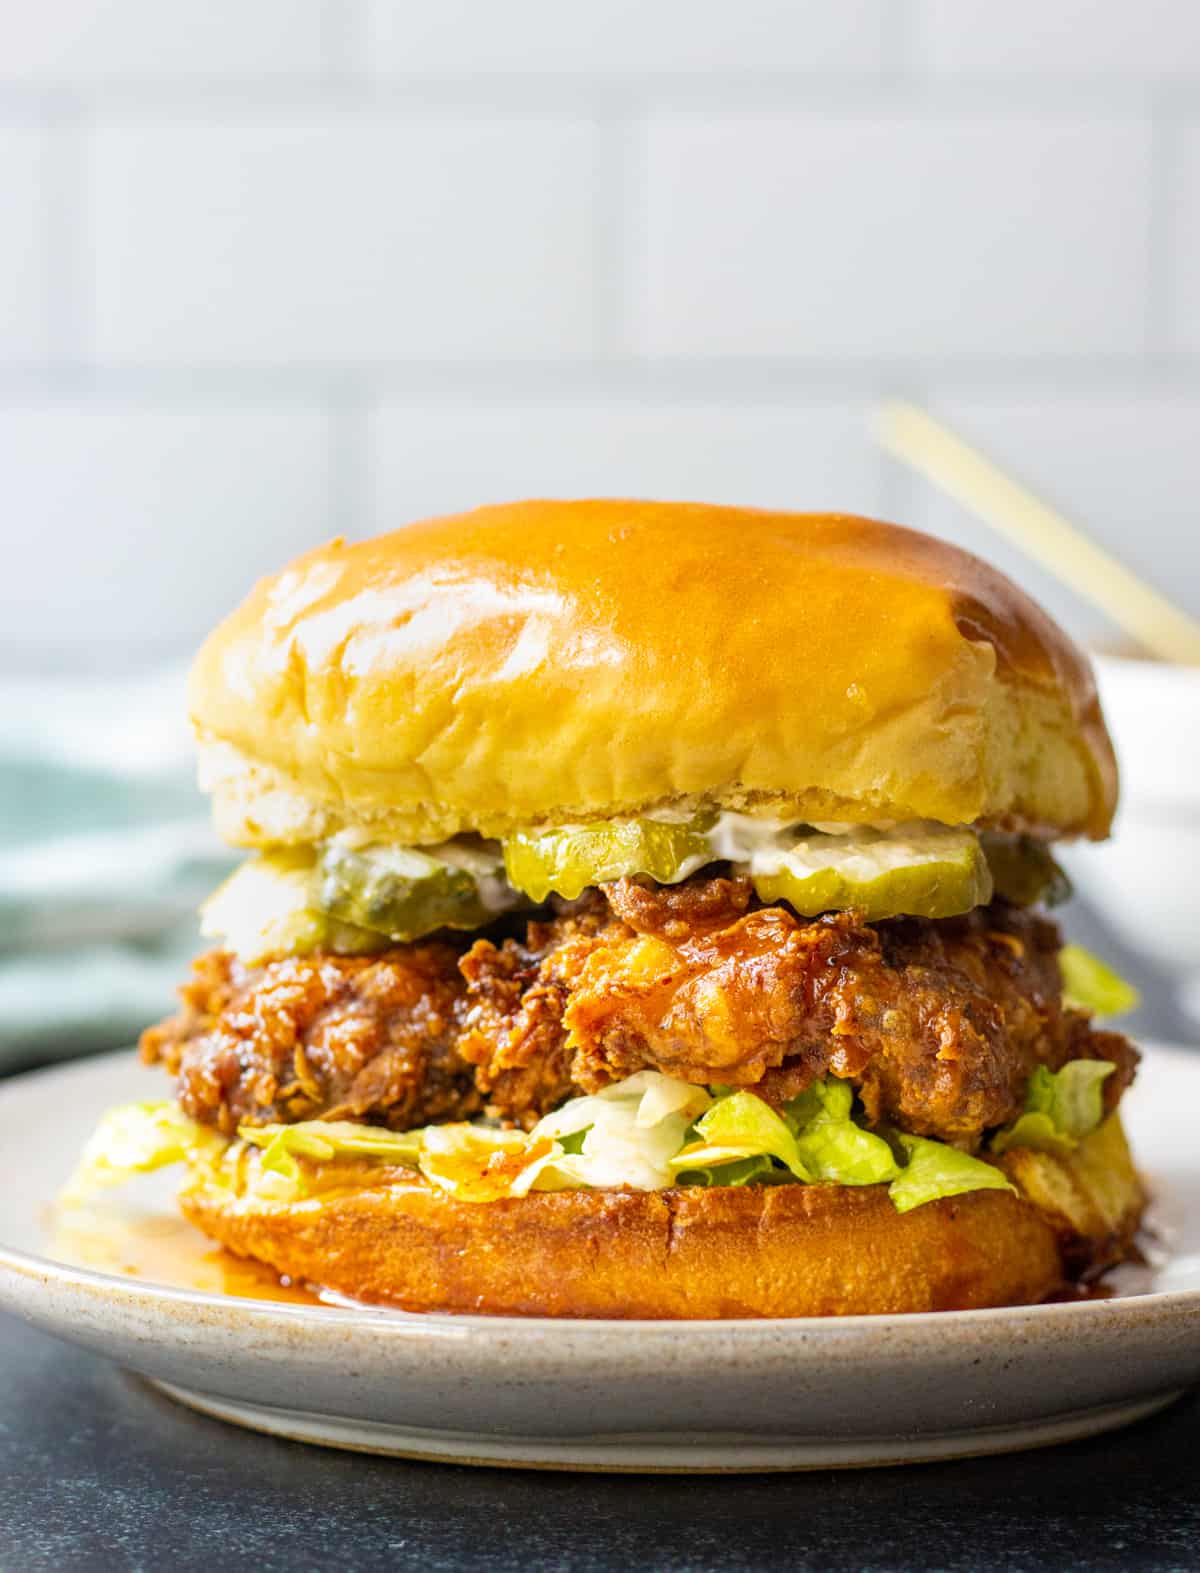 Hot honey chicken sandwich with shredded lettuce and pickles on a plate.